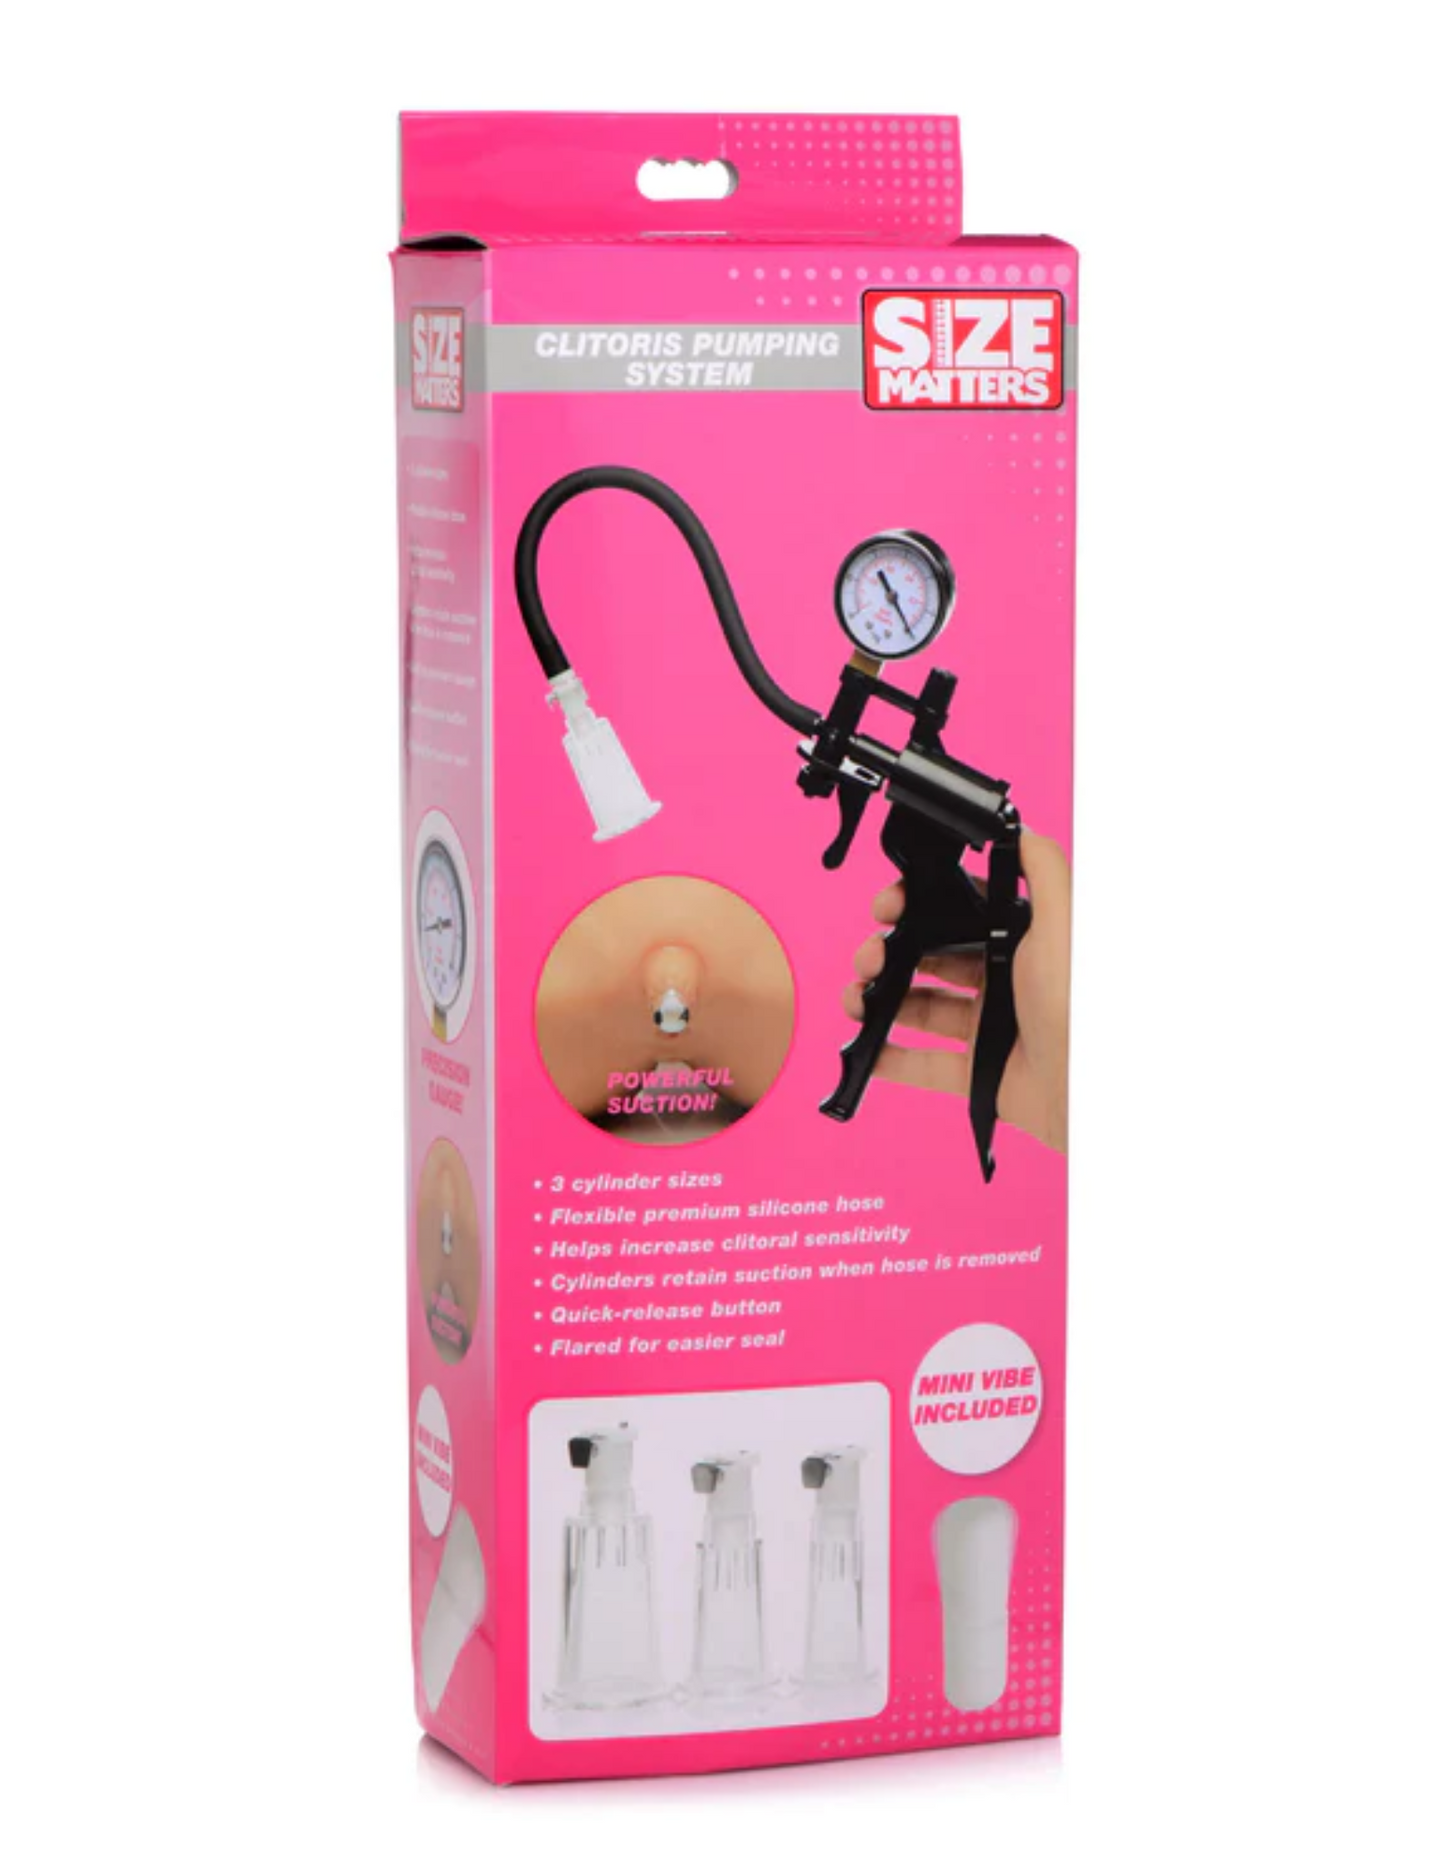 Photo of the front of the box for the  Size Matters Clitoris Pumping System from XR Brands.